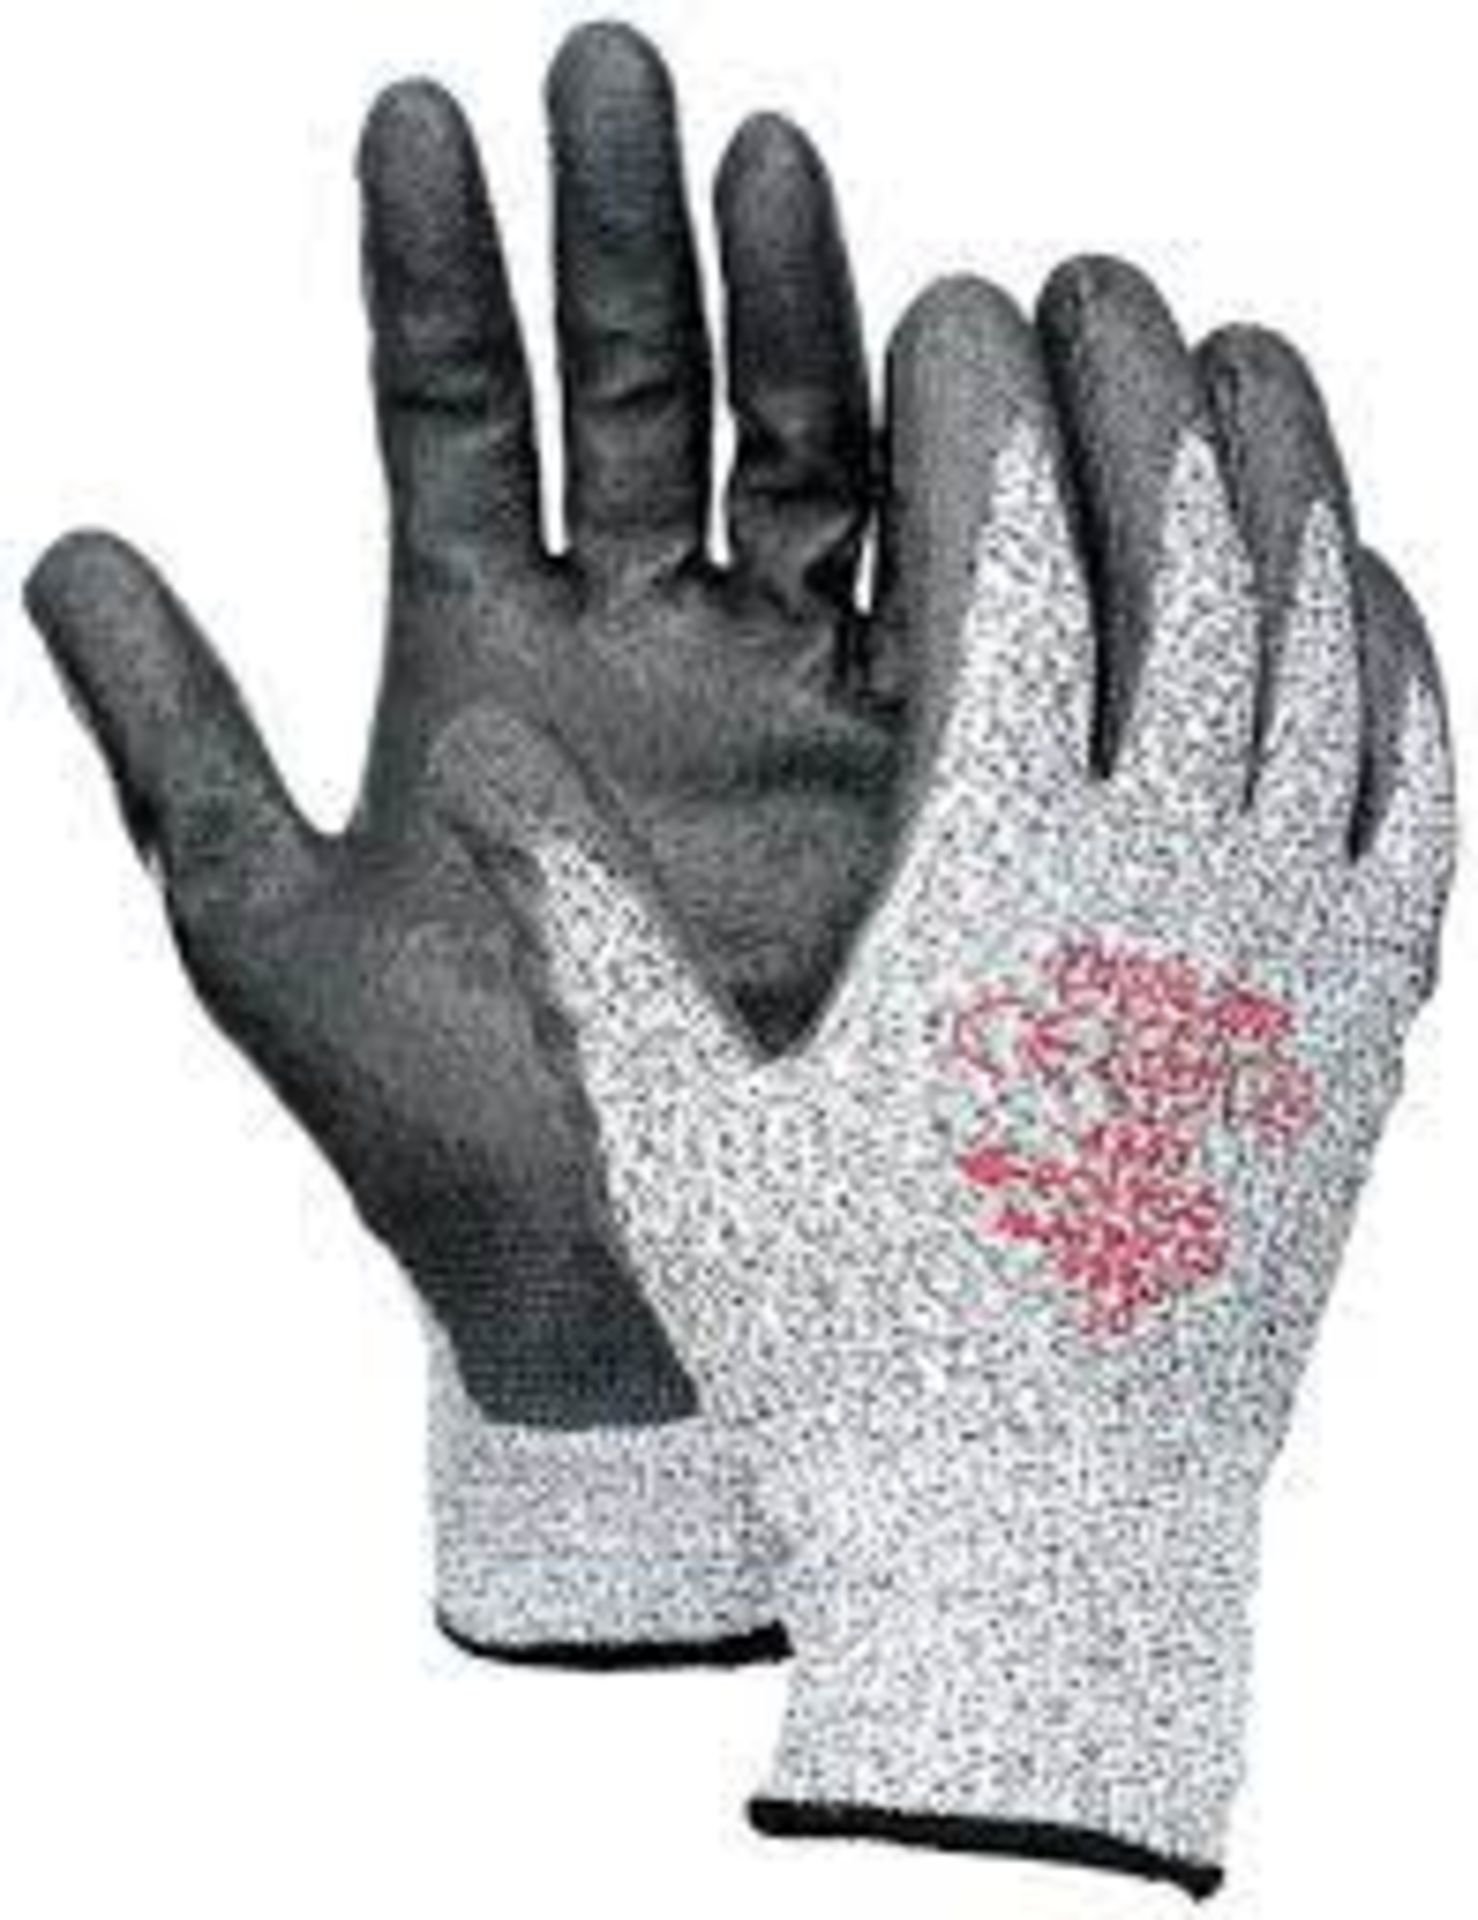 200 X BRAND NEW POLYCO MATRIX C3 POLYURETHANE COATED GLOVES SIZES 7 AND 8 RRP £15 EACH